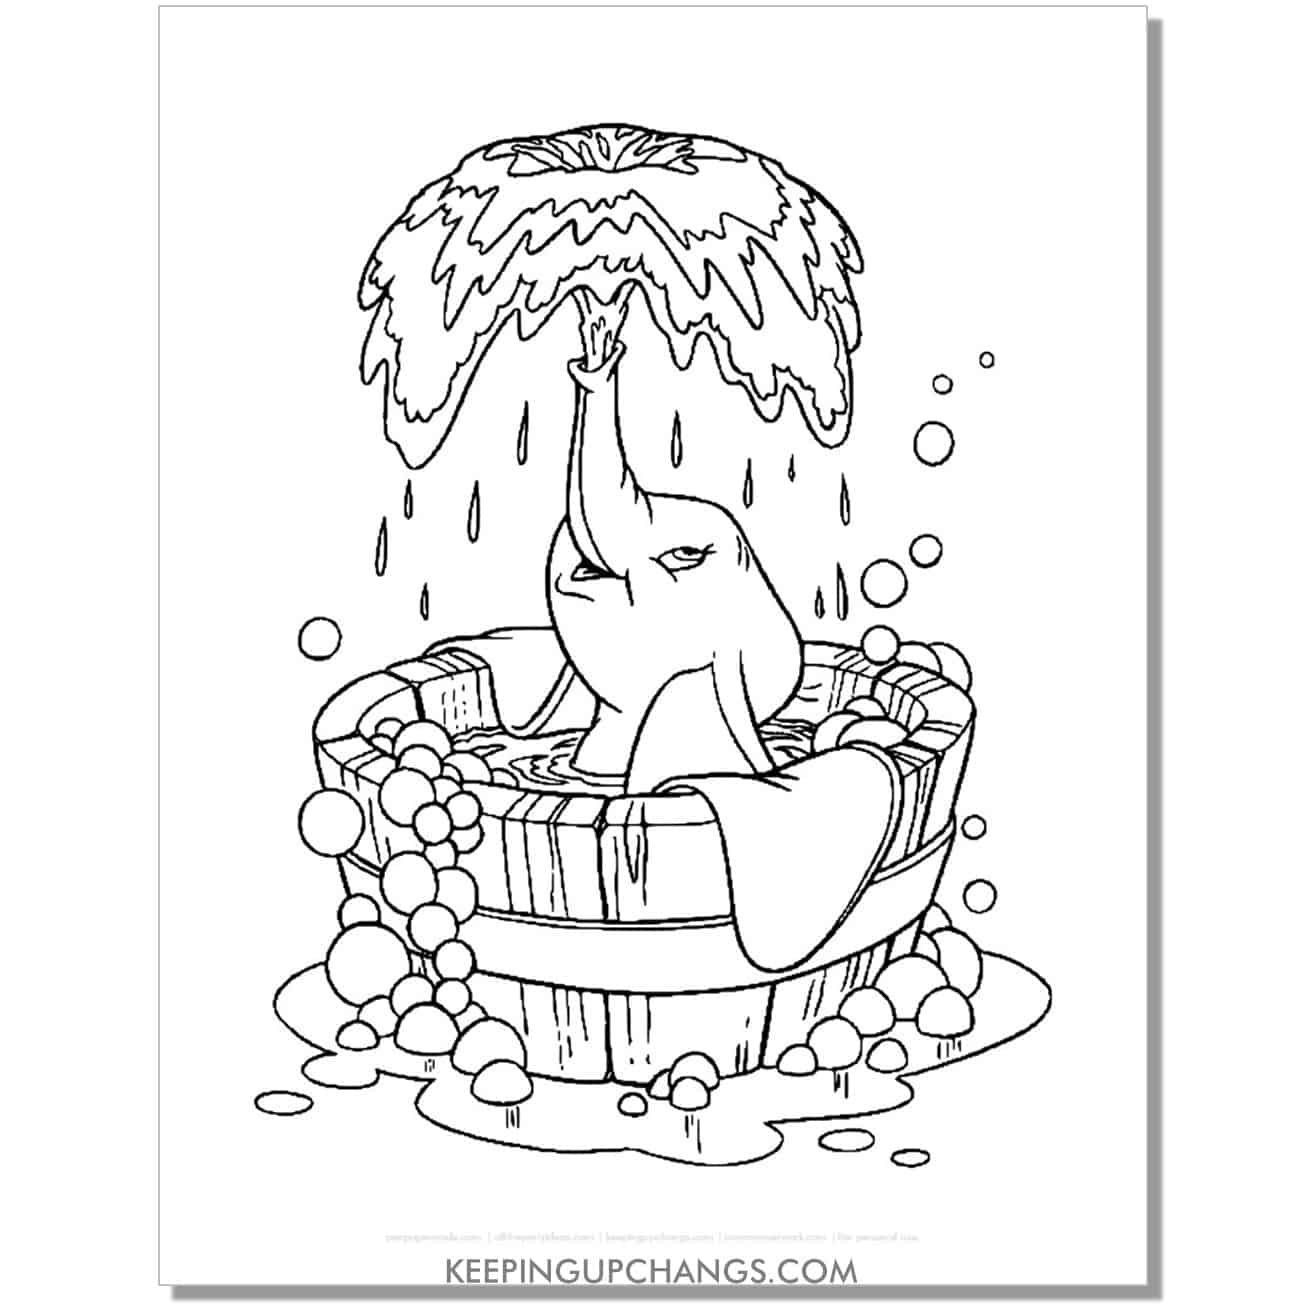 dumbo spouting water from nose coloring page, sheet.